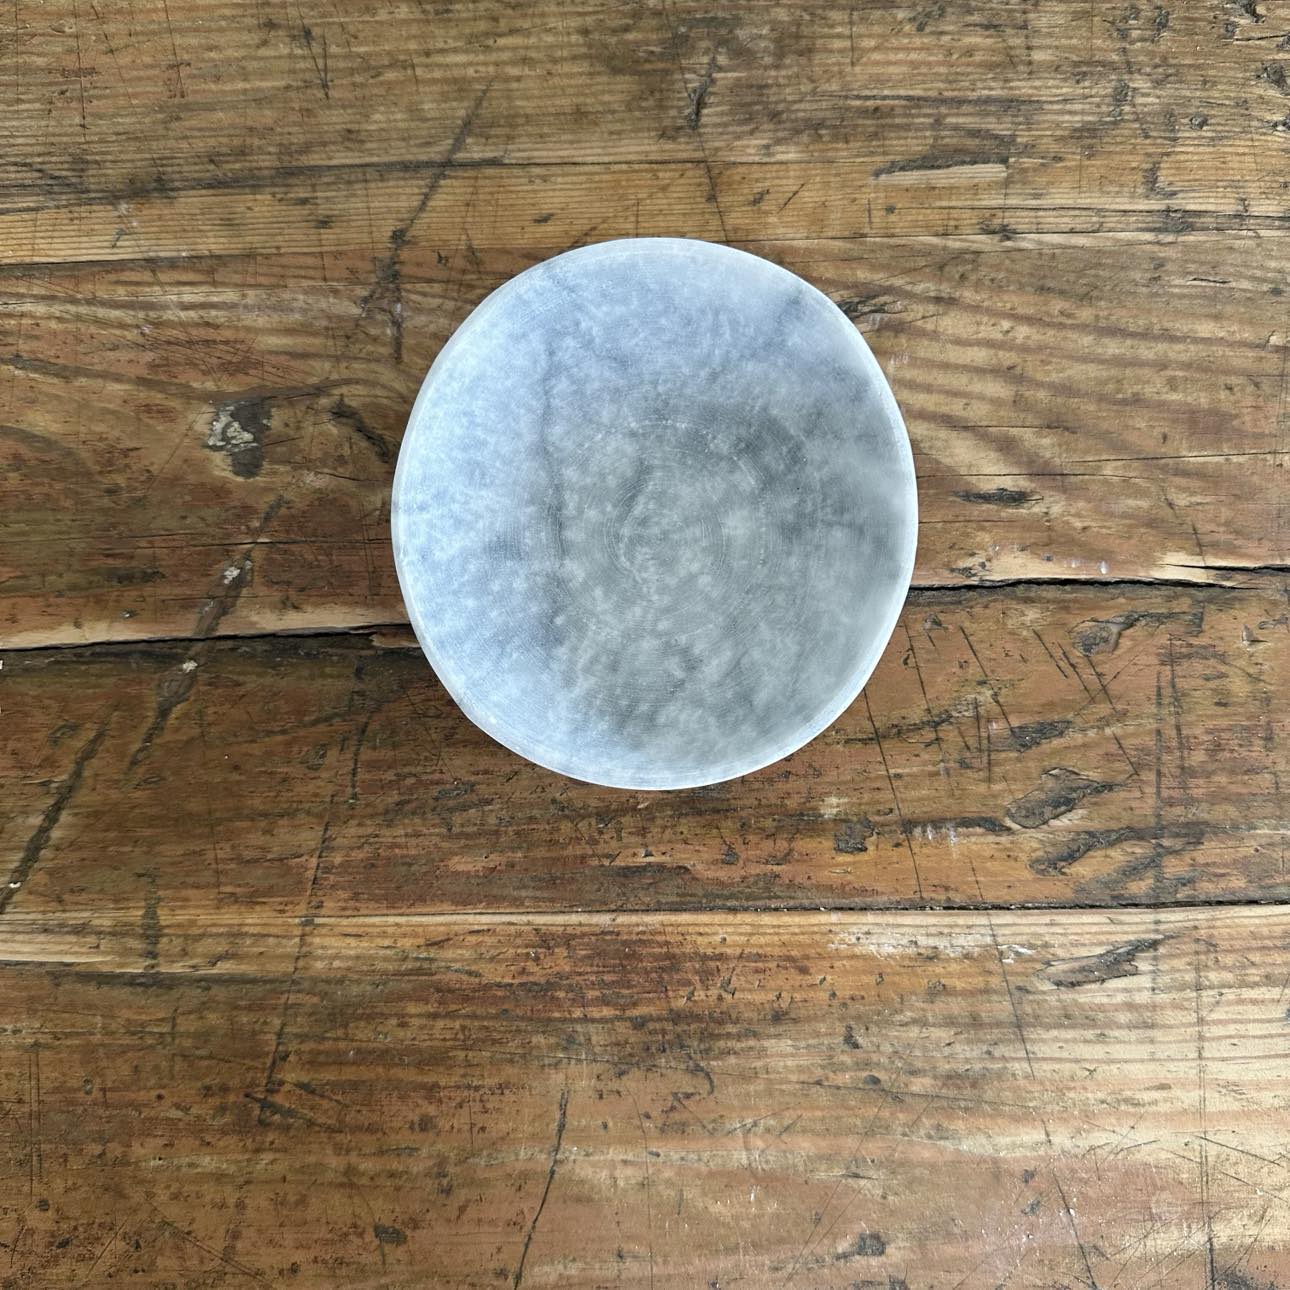 Marble bowl small